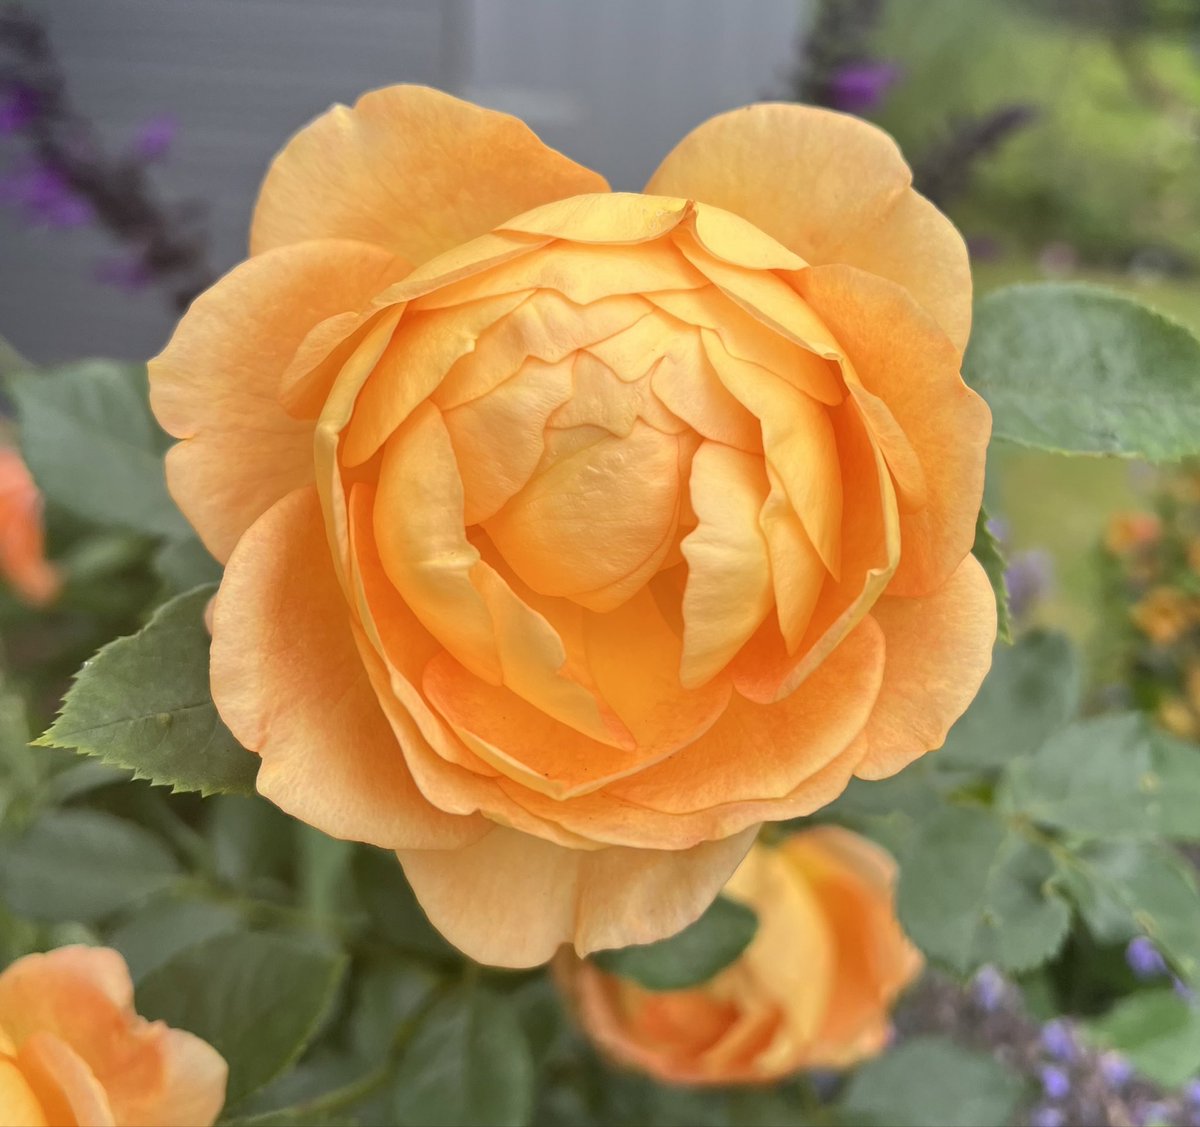 Day 6 of #ARoseADay for #Advent, here’s Lady of Shalott which I added to my new planter this summer. Have a great day everyone, stay safe 🧡🌹🥀❄️ #RoseWednesday #Roses23 #Advent2023 #MyGarden #GardeningX